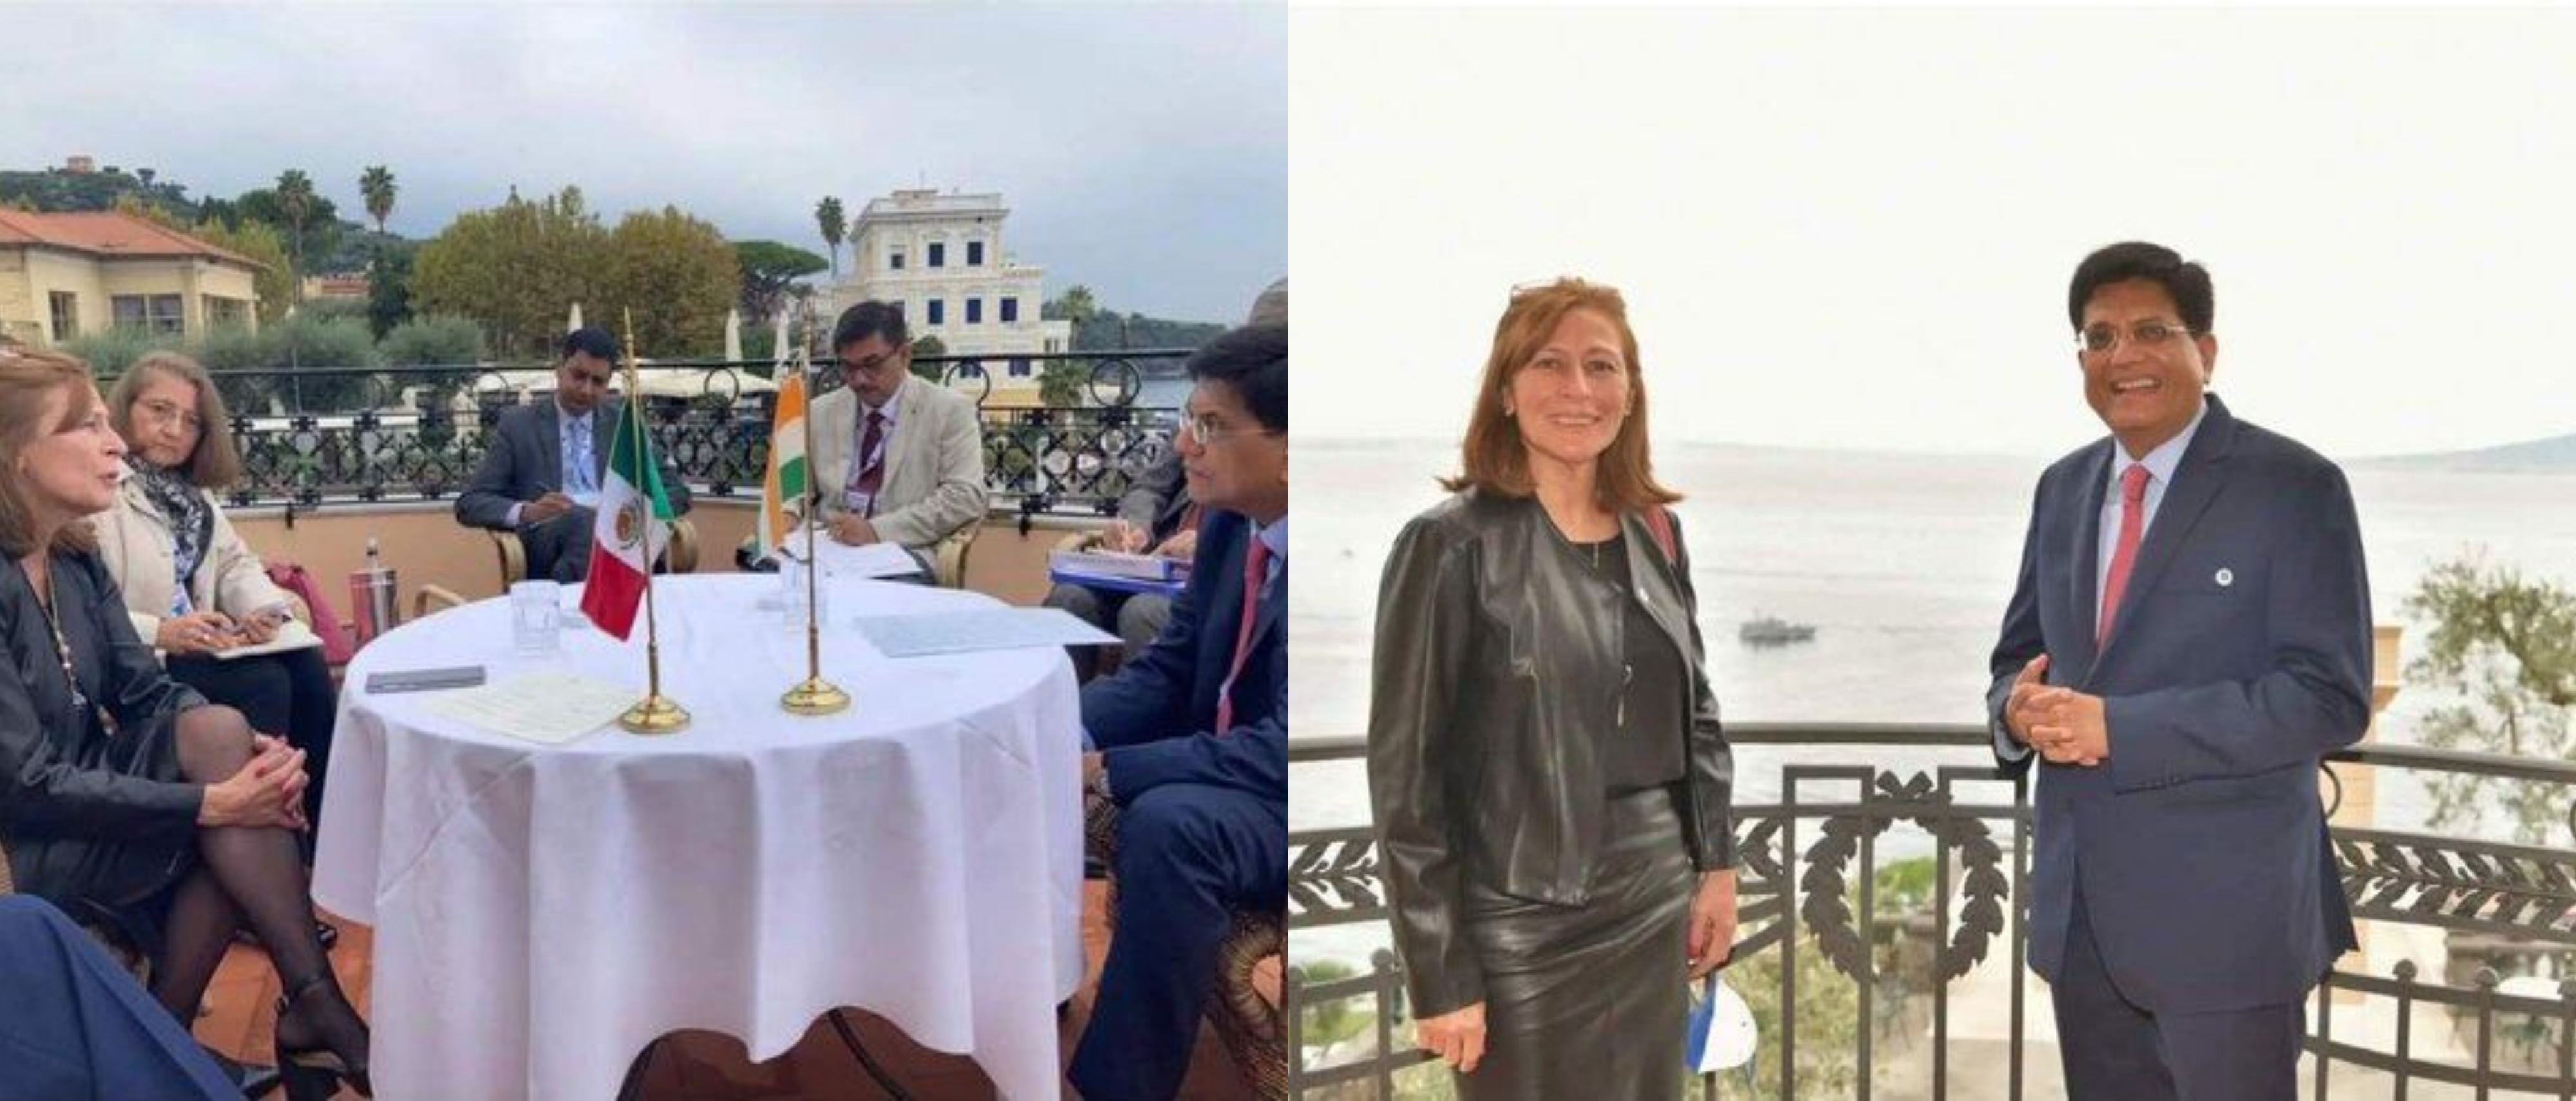  India's Minister of Commerce and Industry Shri. Piyush Goyal  met Mexico's Secretary of Economy Ms.Tatiana Clouthier  in Italy before the G20 Trade Minister's Meeting on 11th October 2021